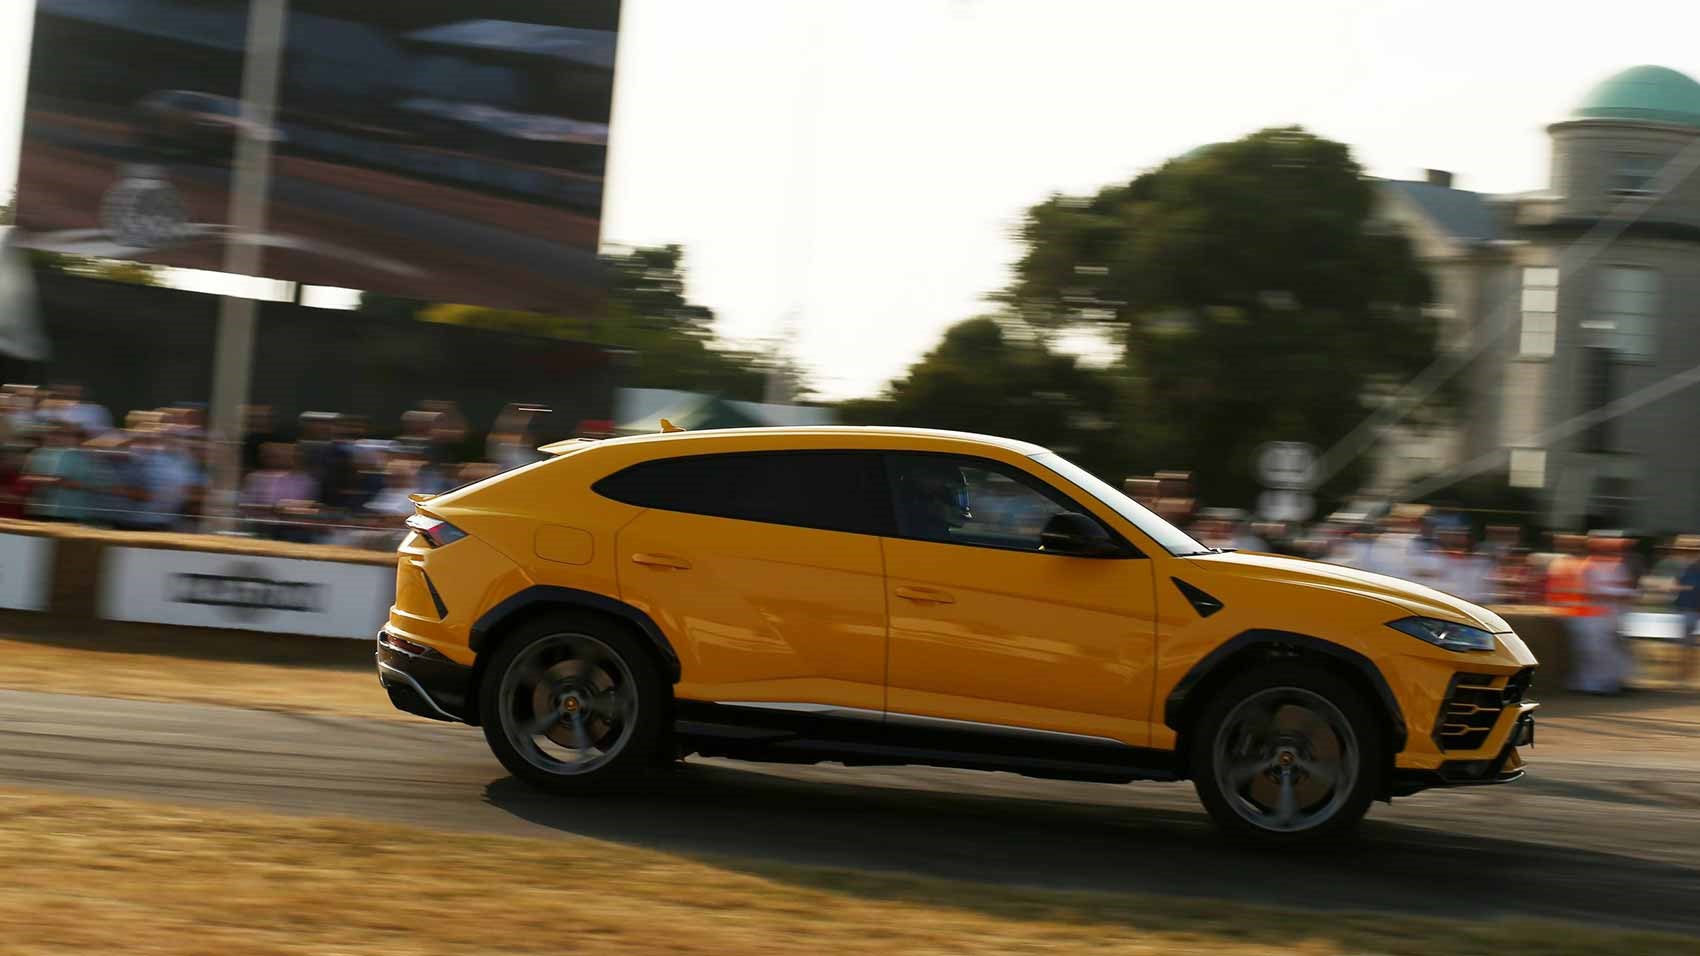 Lamborghini Urus at the 2018 Goodwood Festival of Speed: we drove the first one in the UK